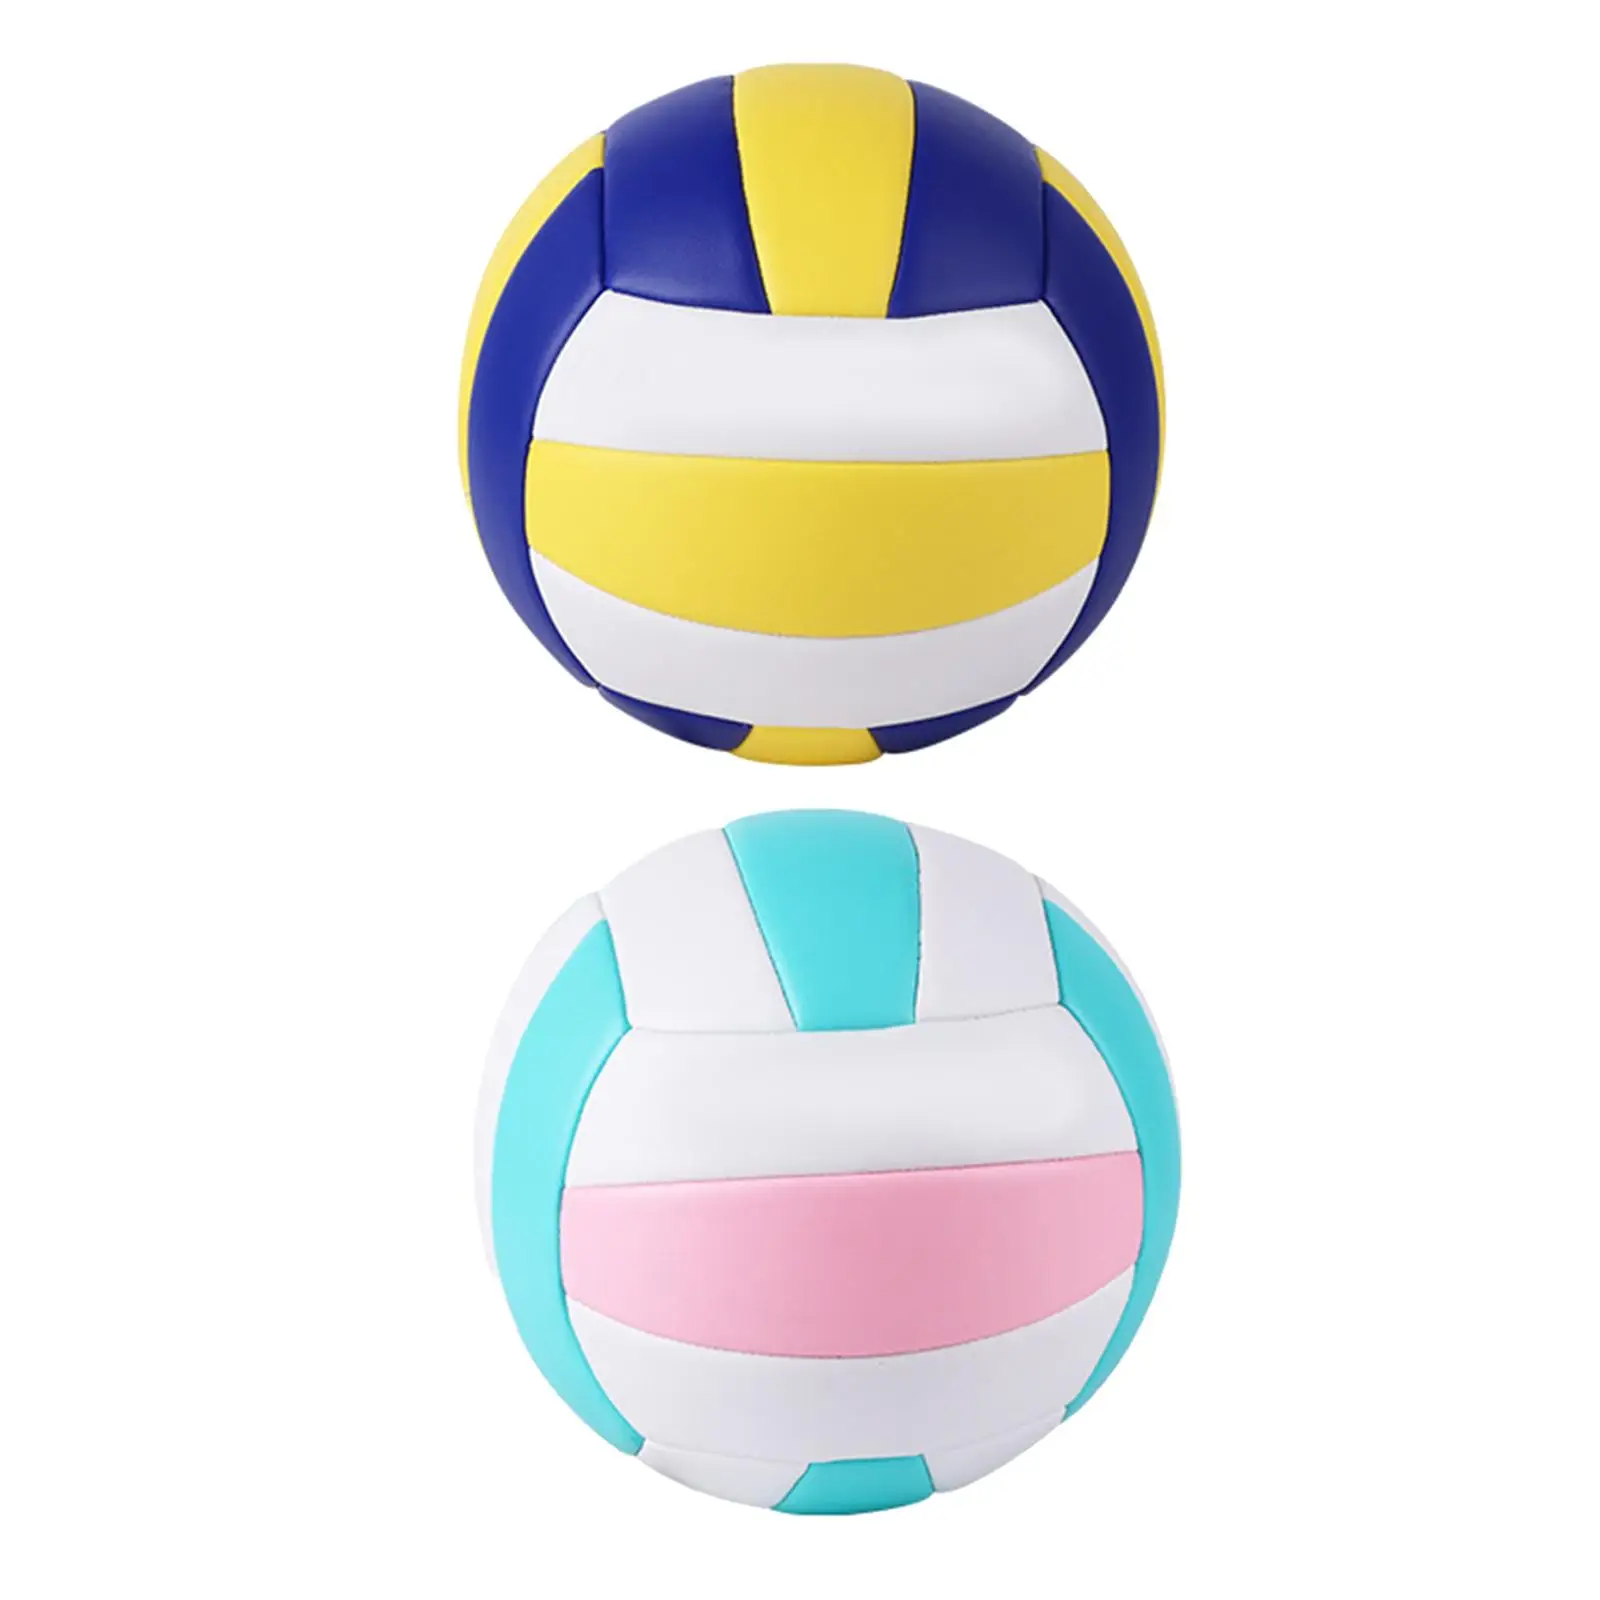 Professional Official Size 5 Indoor Volleyball Soft PU Leather Outdoor Recreational Ball Game Match for Kids Teenager